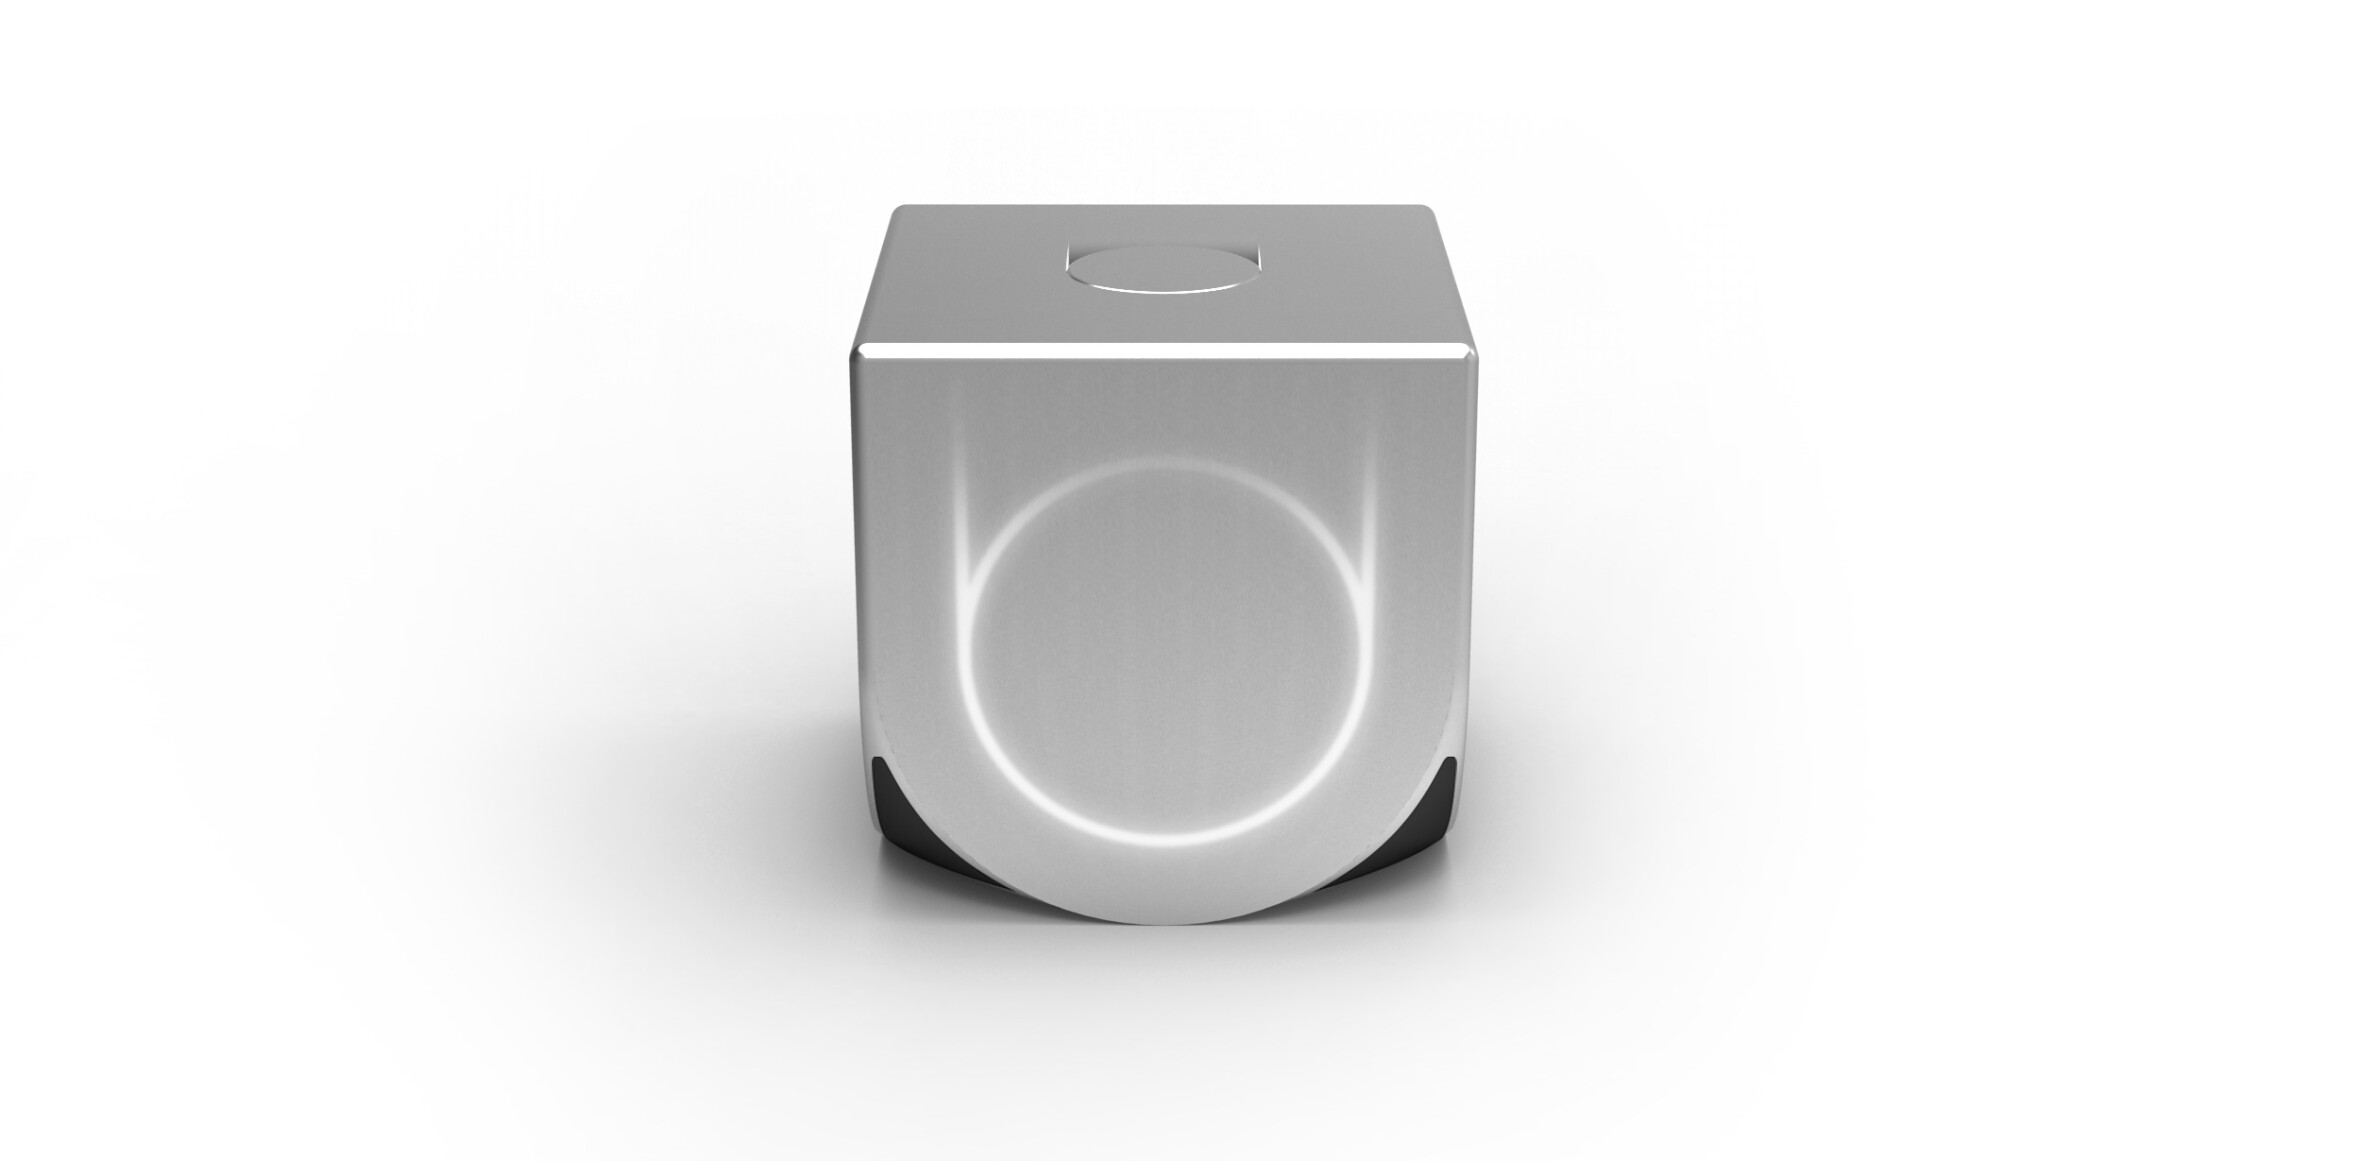 OUYA raises $15m through Kleiner Perkins, Mayfield Fund and others, but launch date slips to June 25